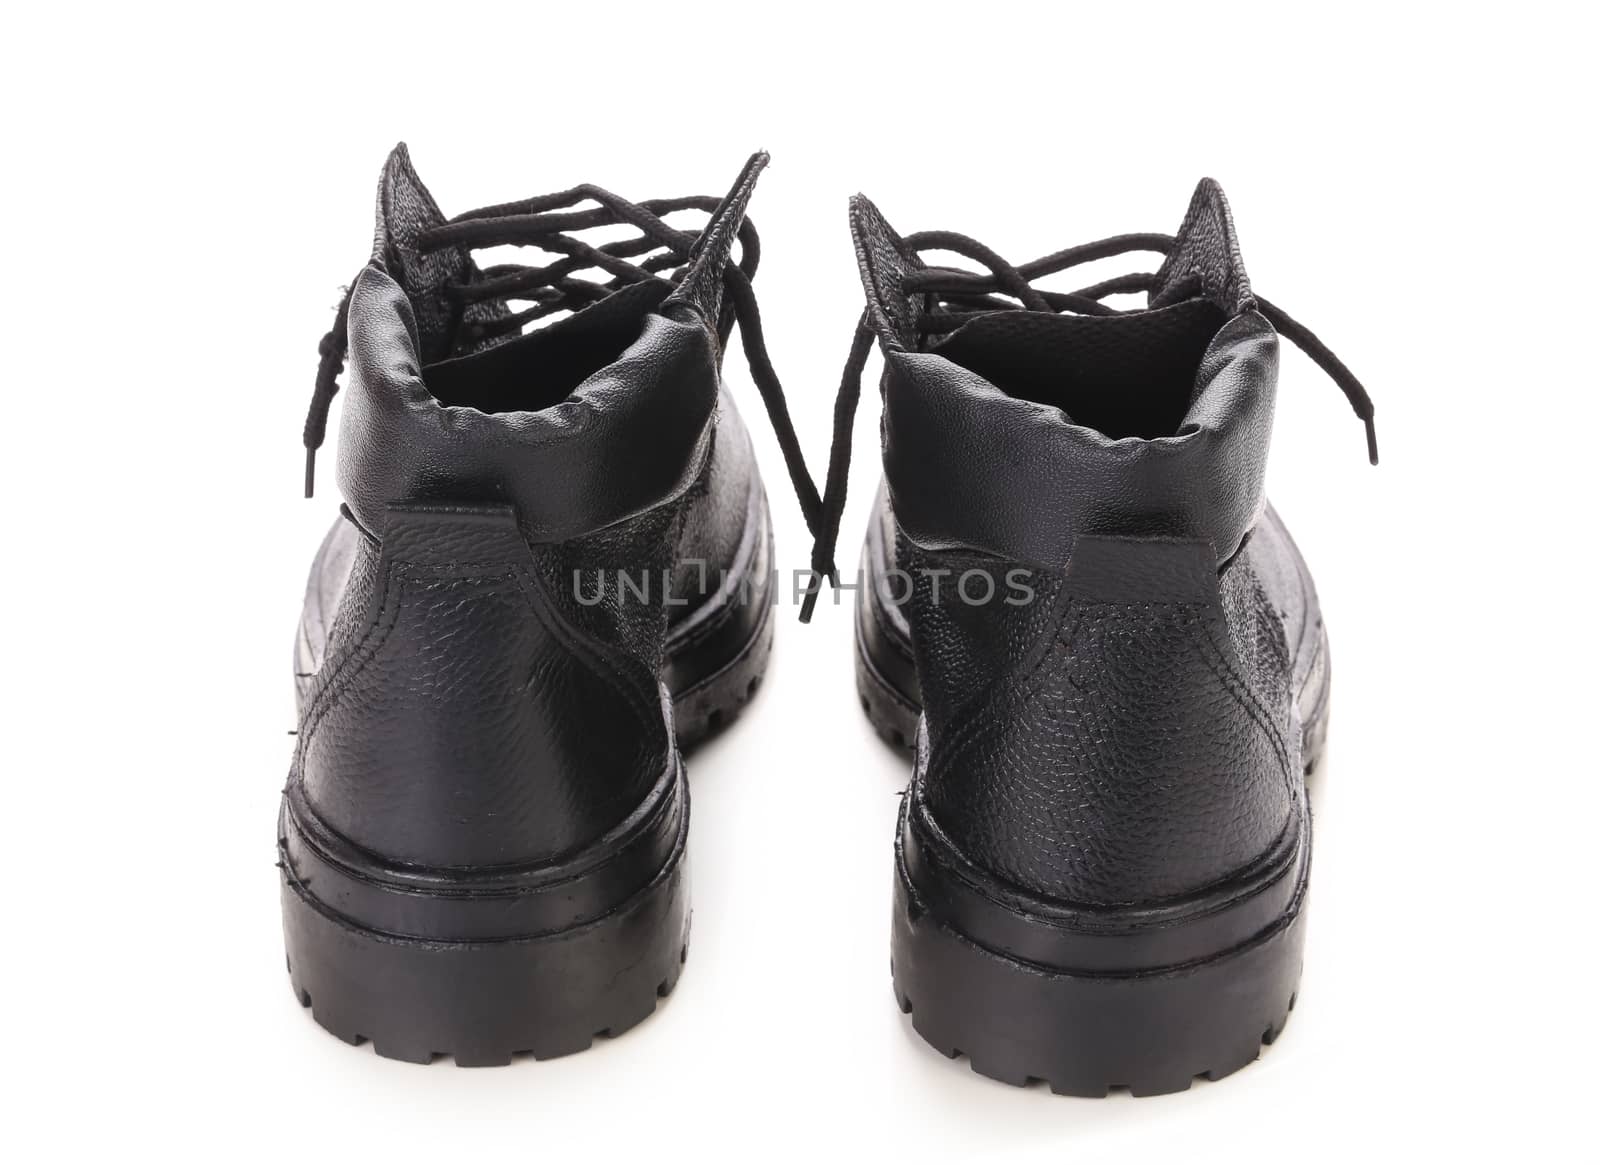 Pair of black boots. Isolated on a white background.